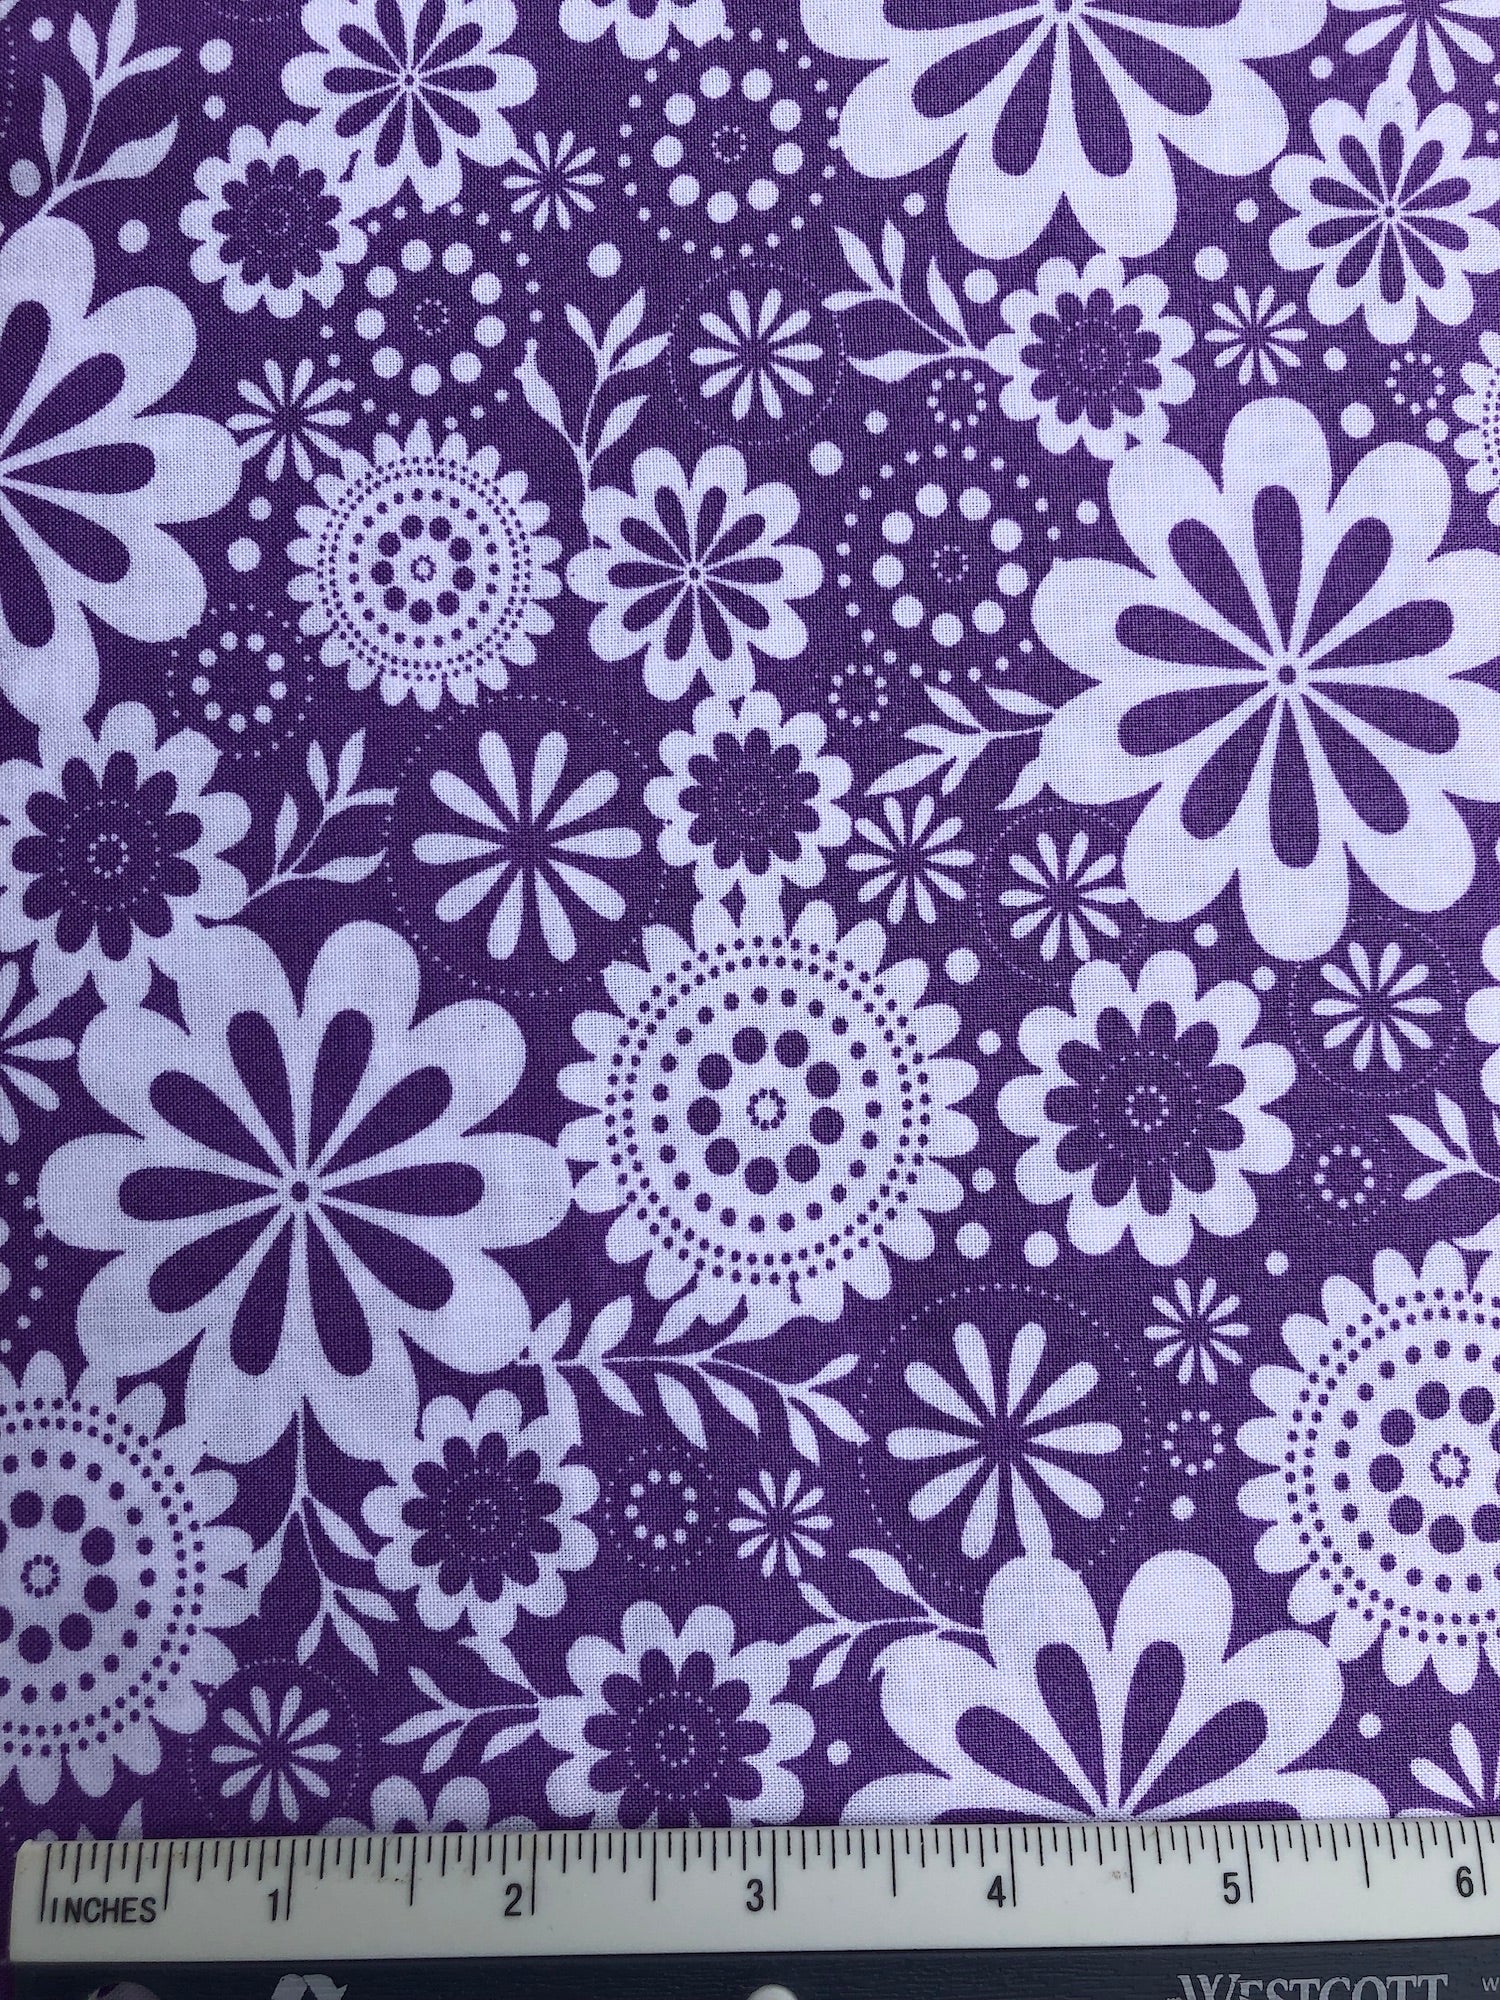 Floral - FS261 - Purple background with White stylised flowers